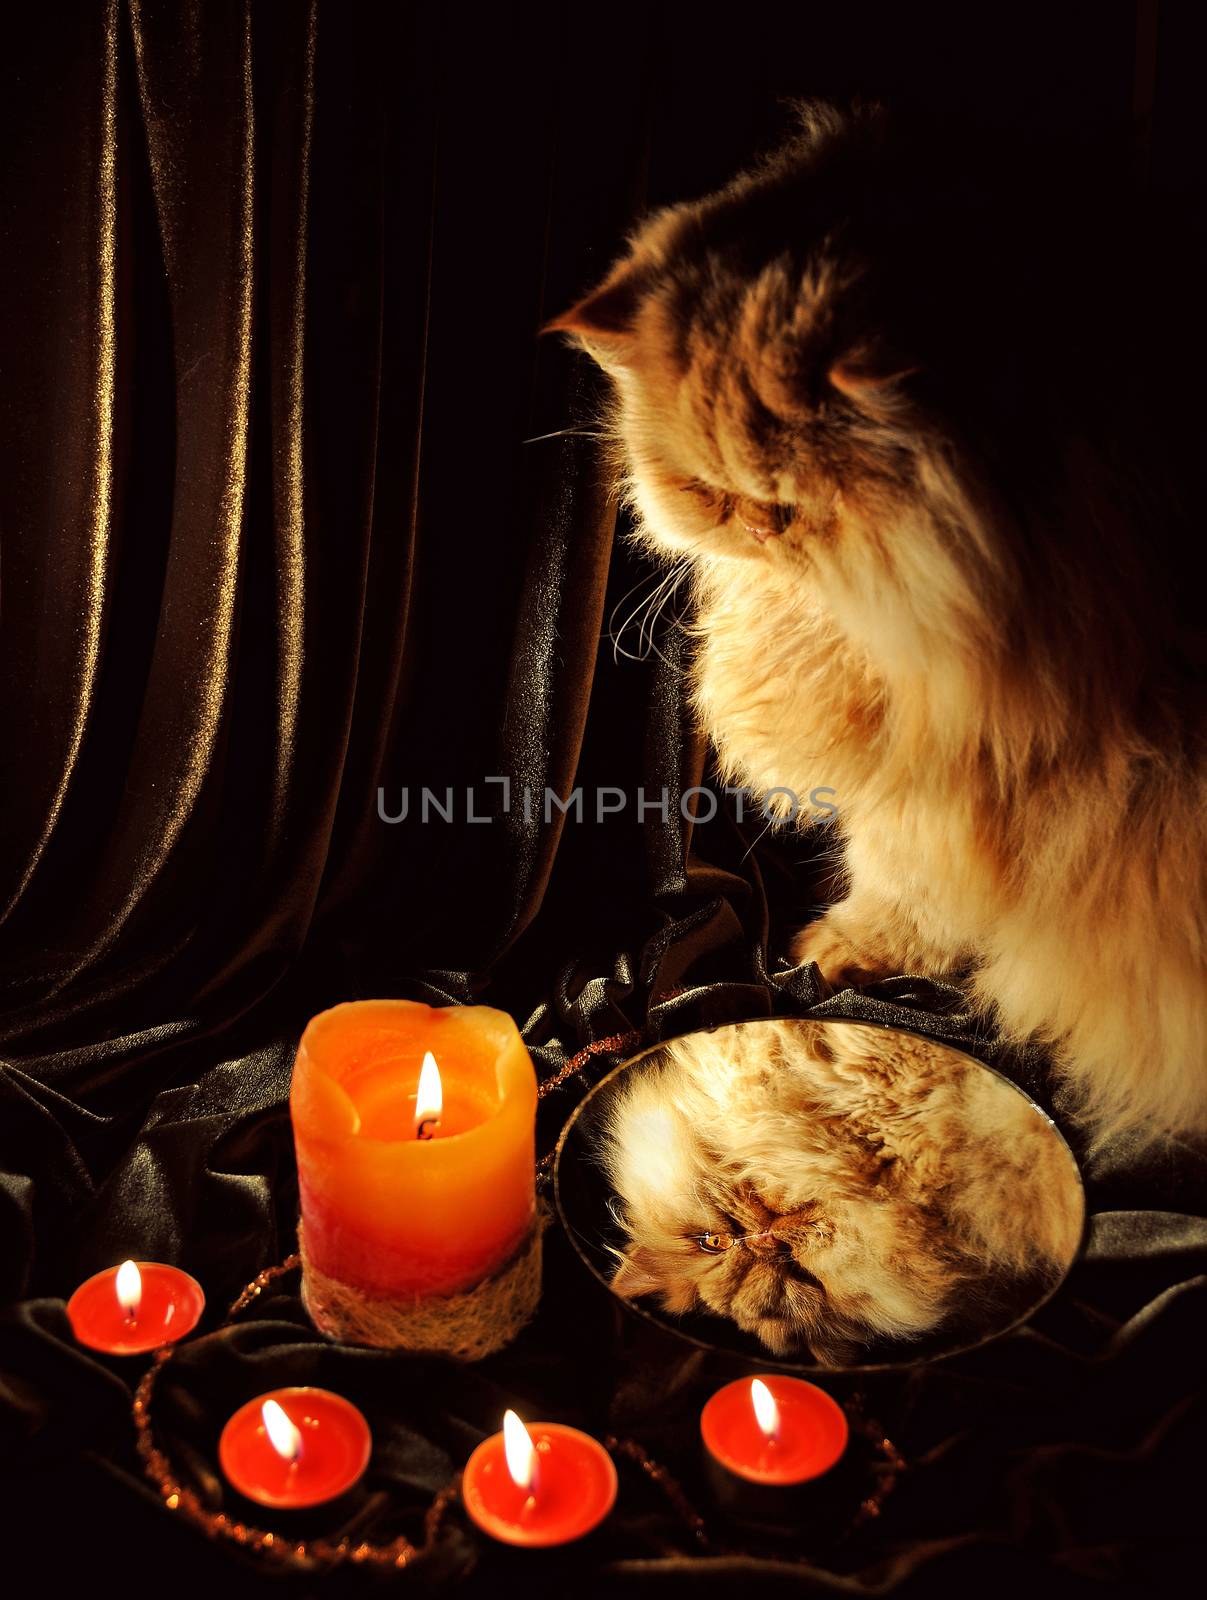 Red Cat and practice divination on Merry Christmas by infinityyy